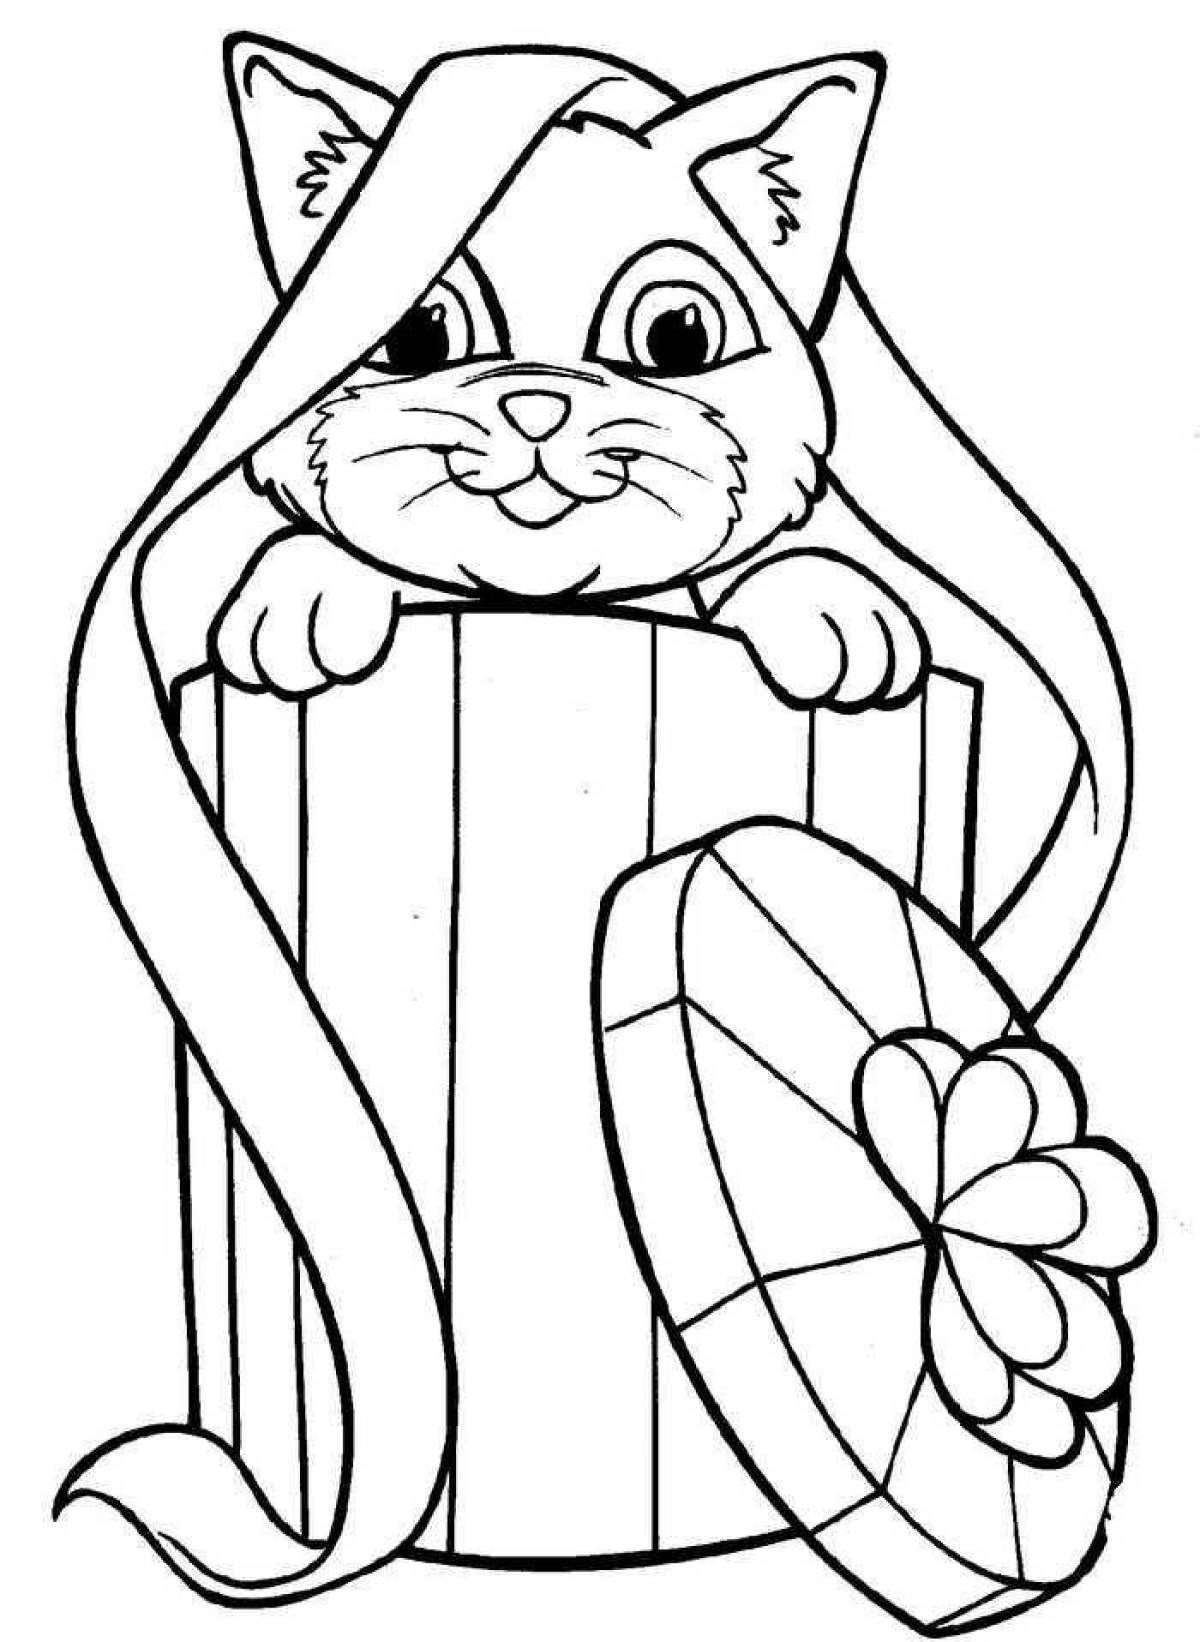 Coloring book of happy cat